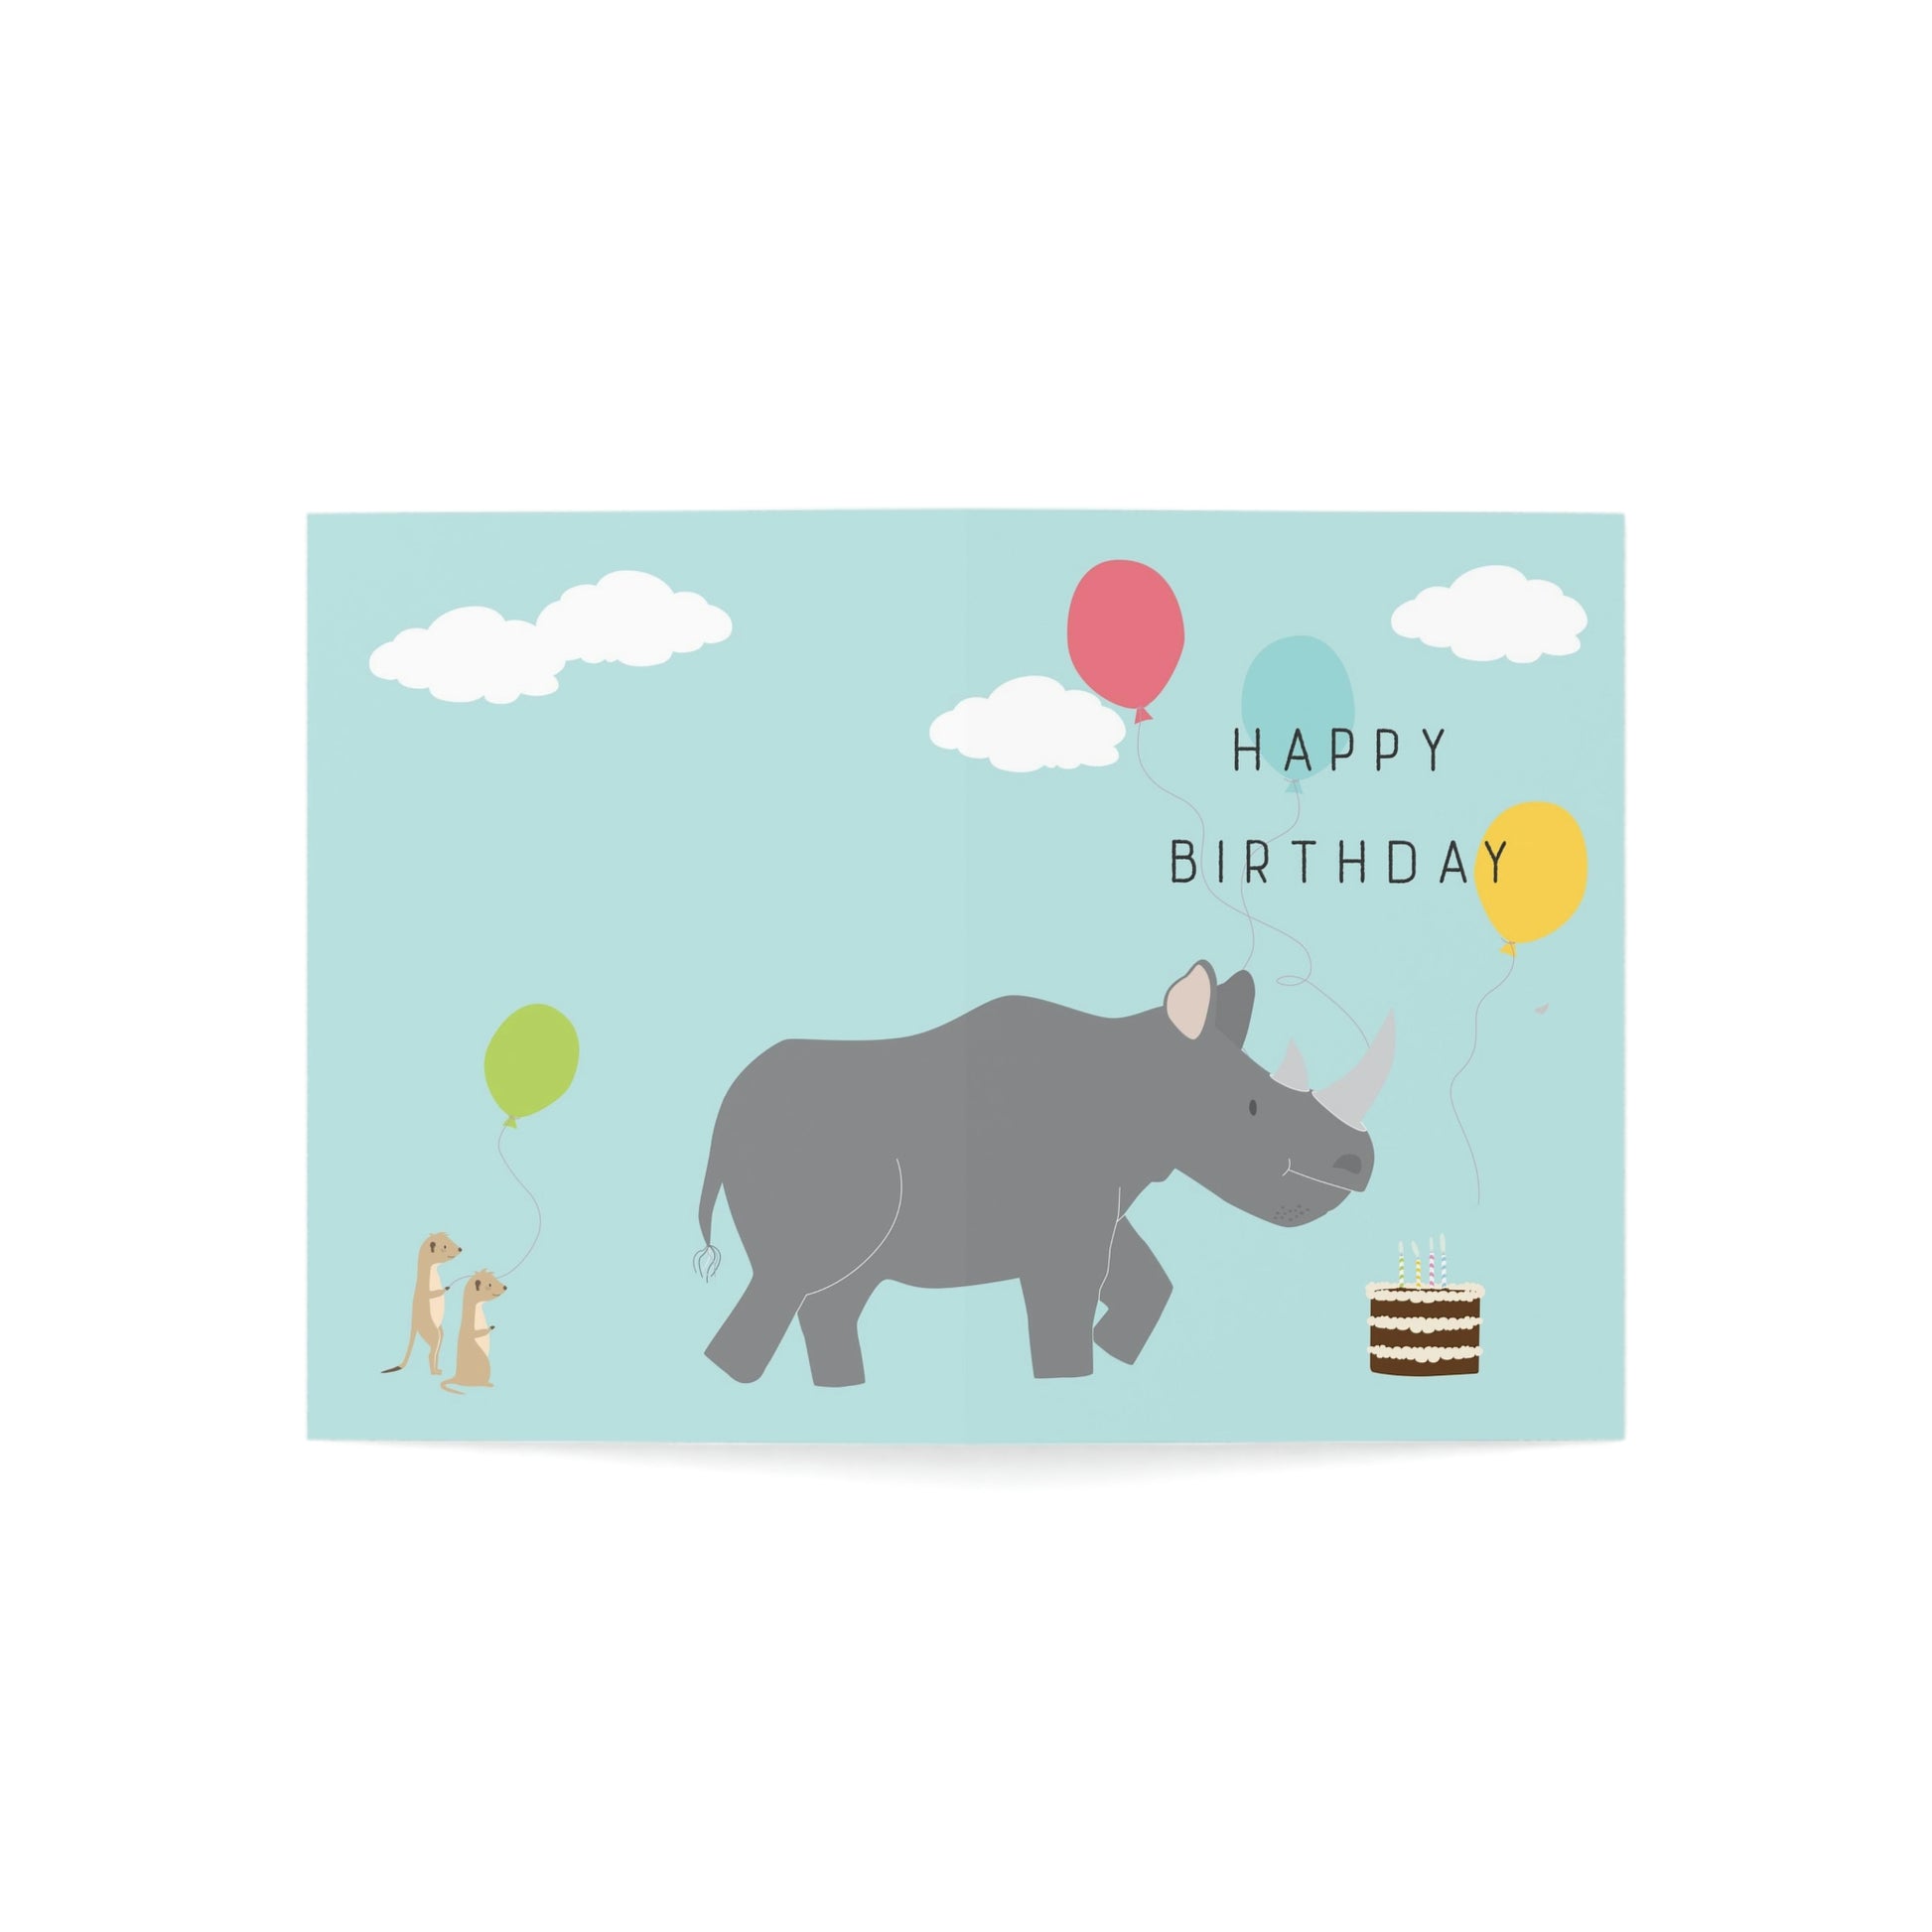 Open Cover Shot of the Rhino Birthday Card